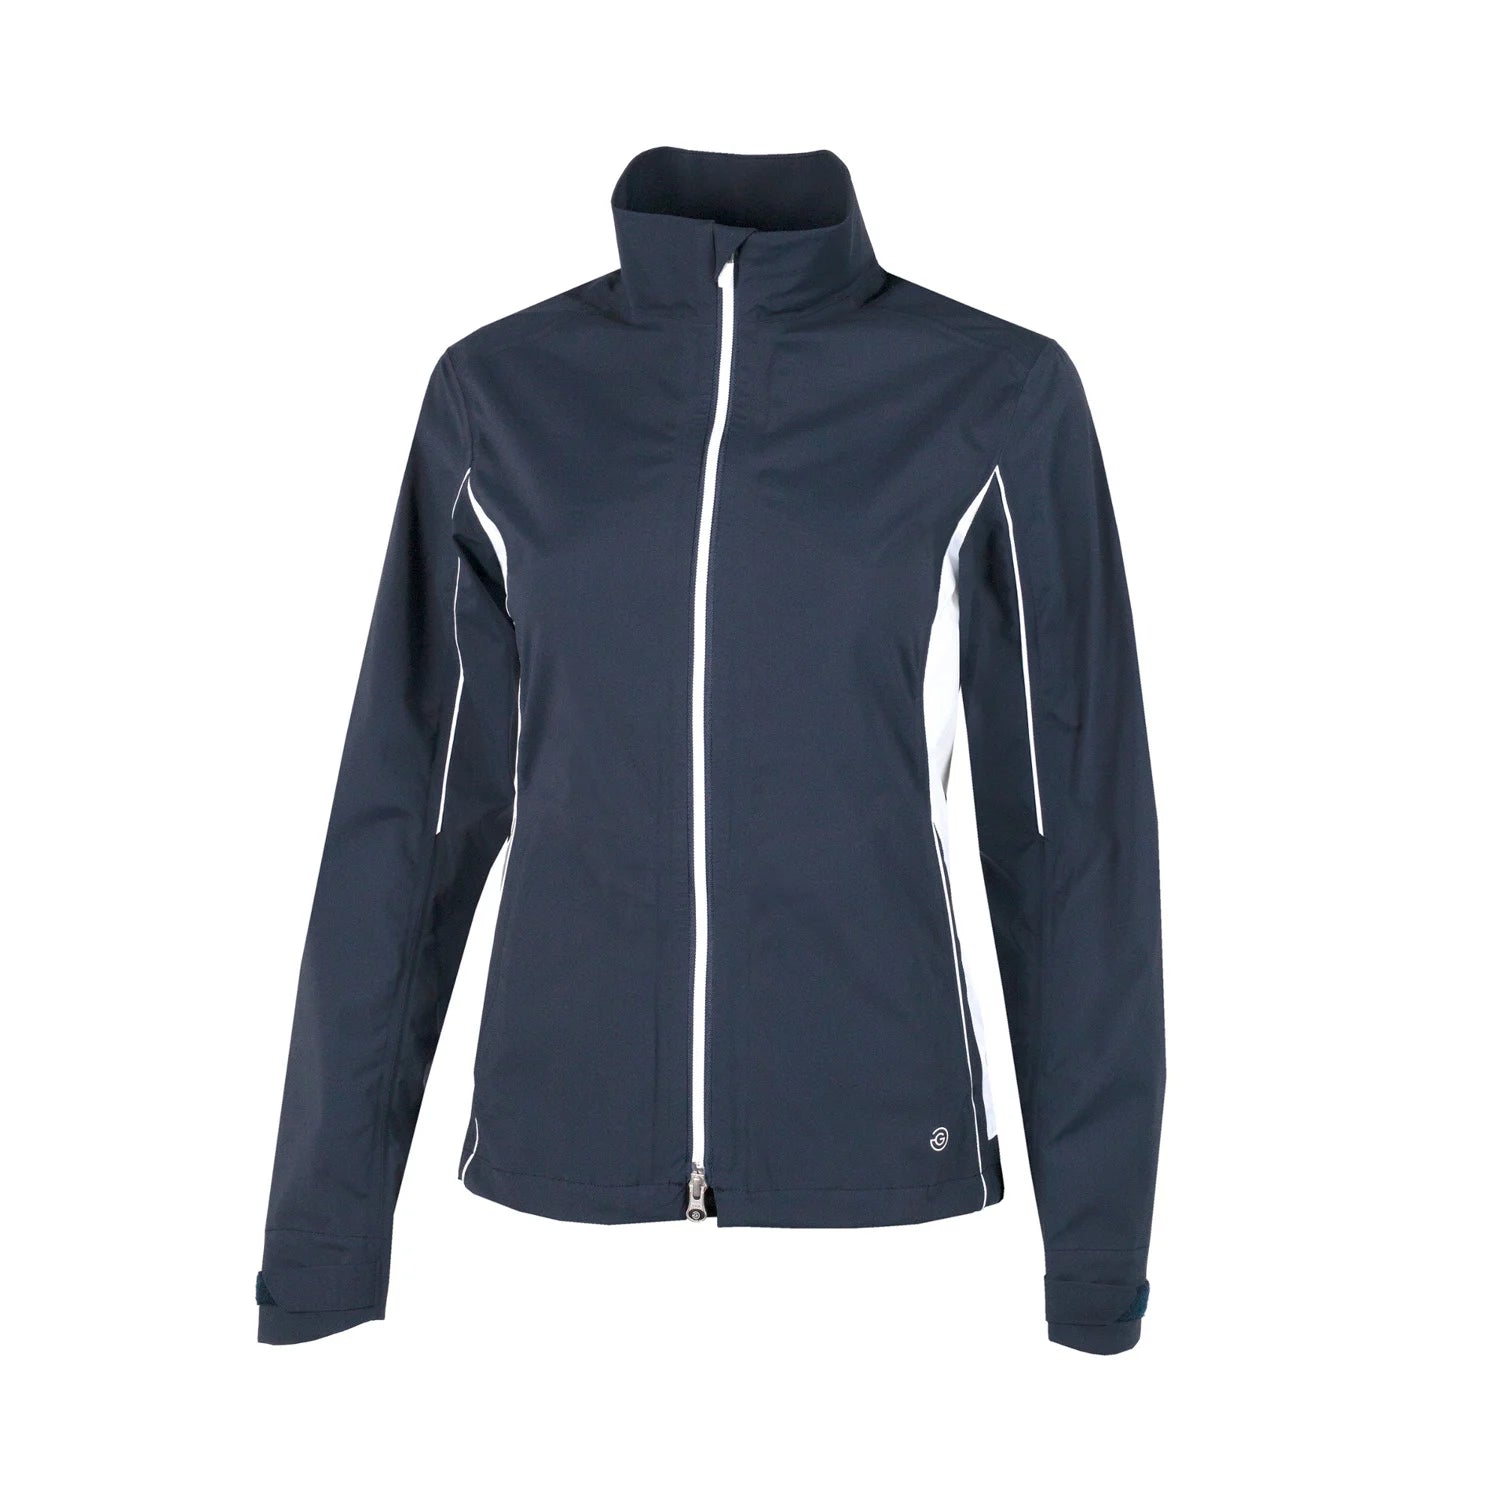 Galvin Green ALLY Jacket Pacl. Navy/Cool grey/White DAM